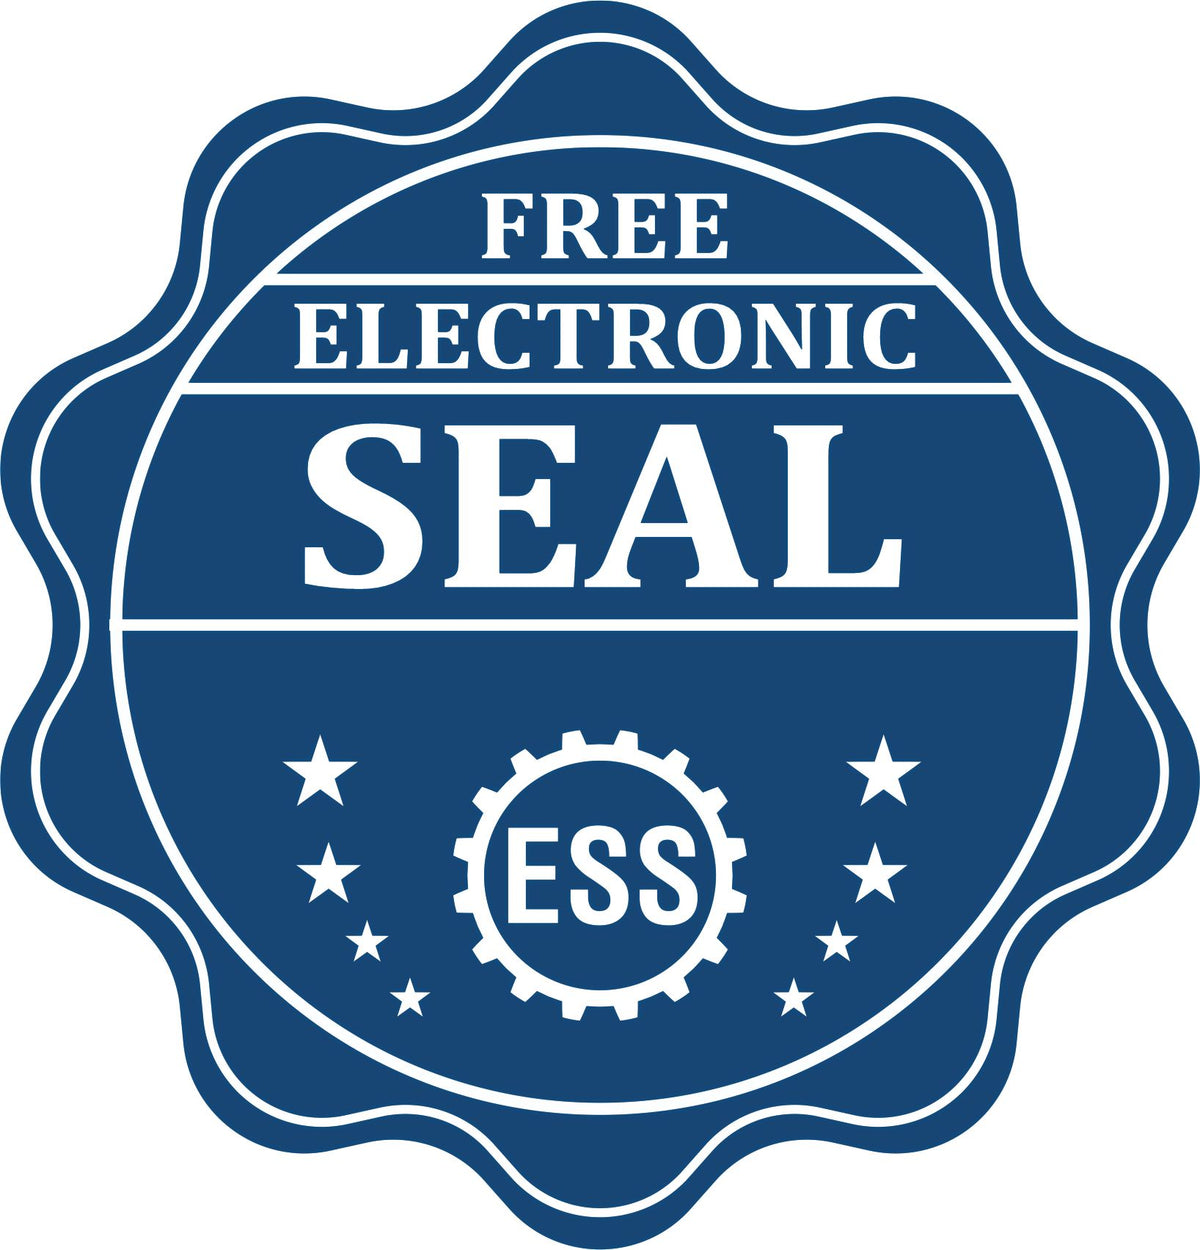 A badge showing a free electronic seal for the Premium MaxLight Pre-Inked Virginia Landscape Architectural Stamp with stars and the ESS gear on the emblem.